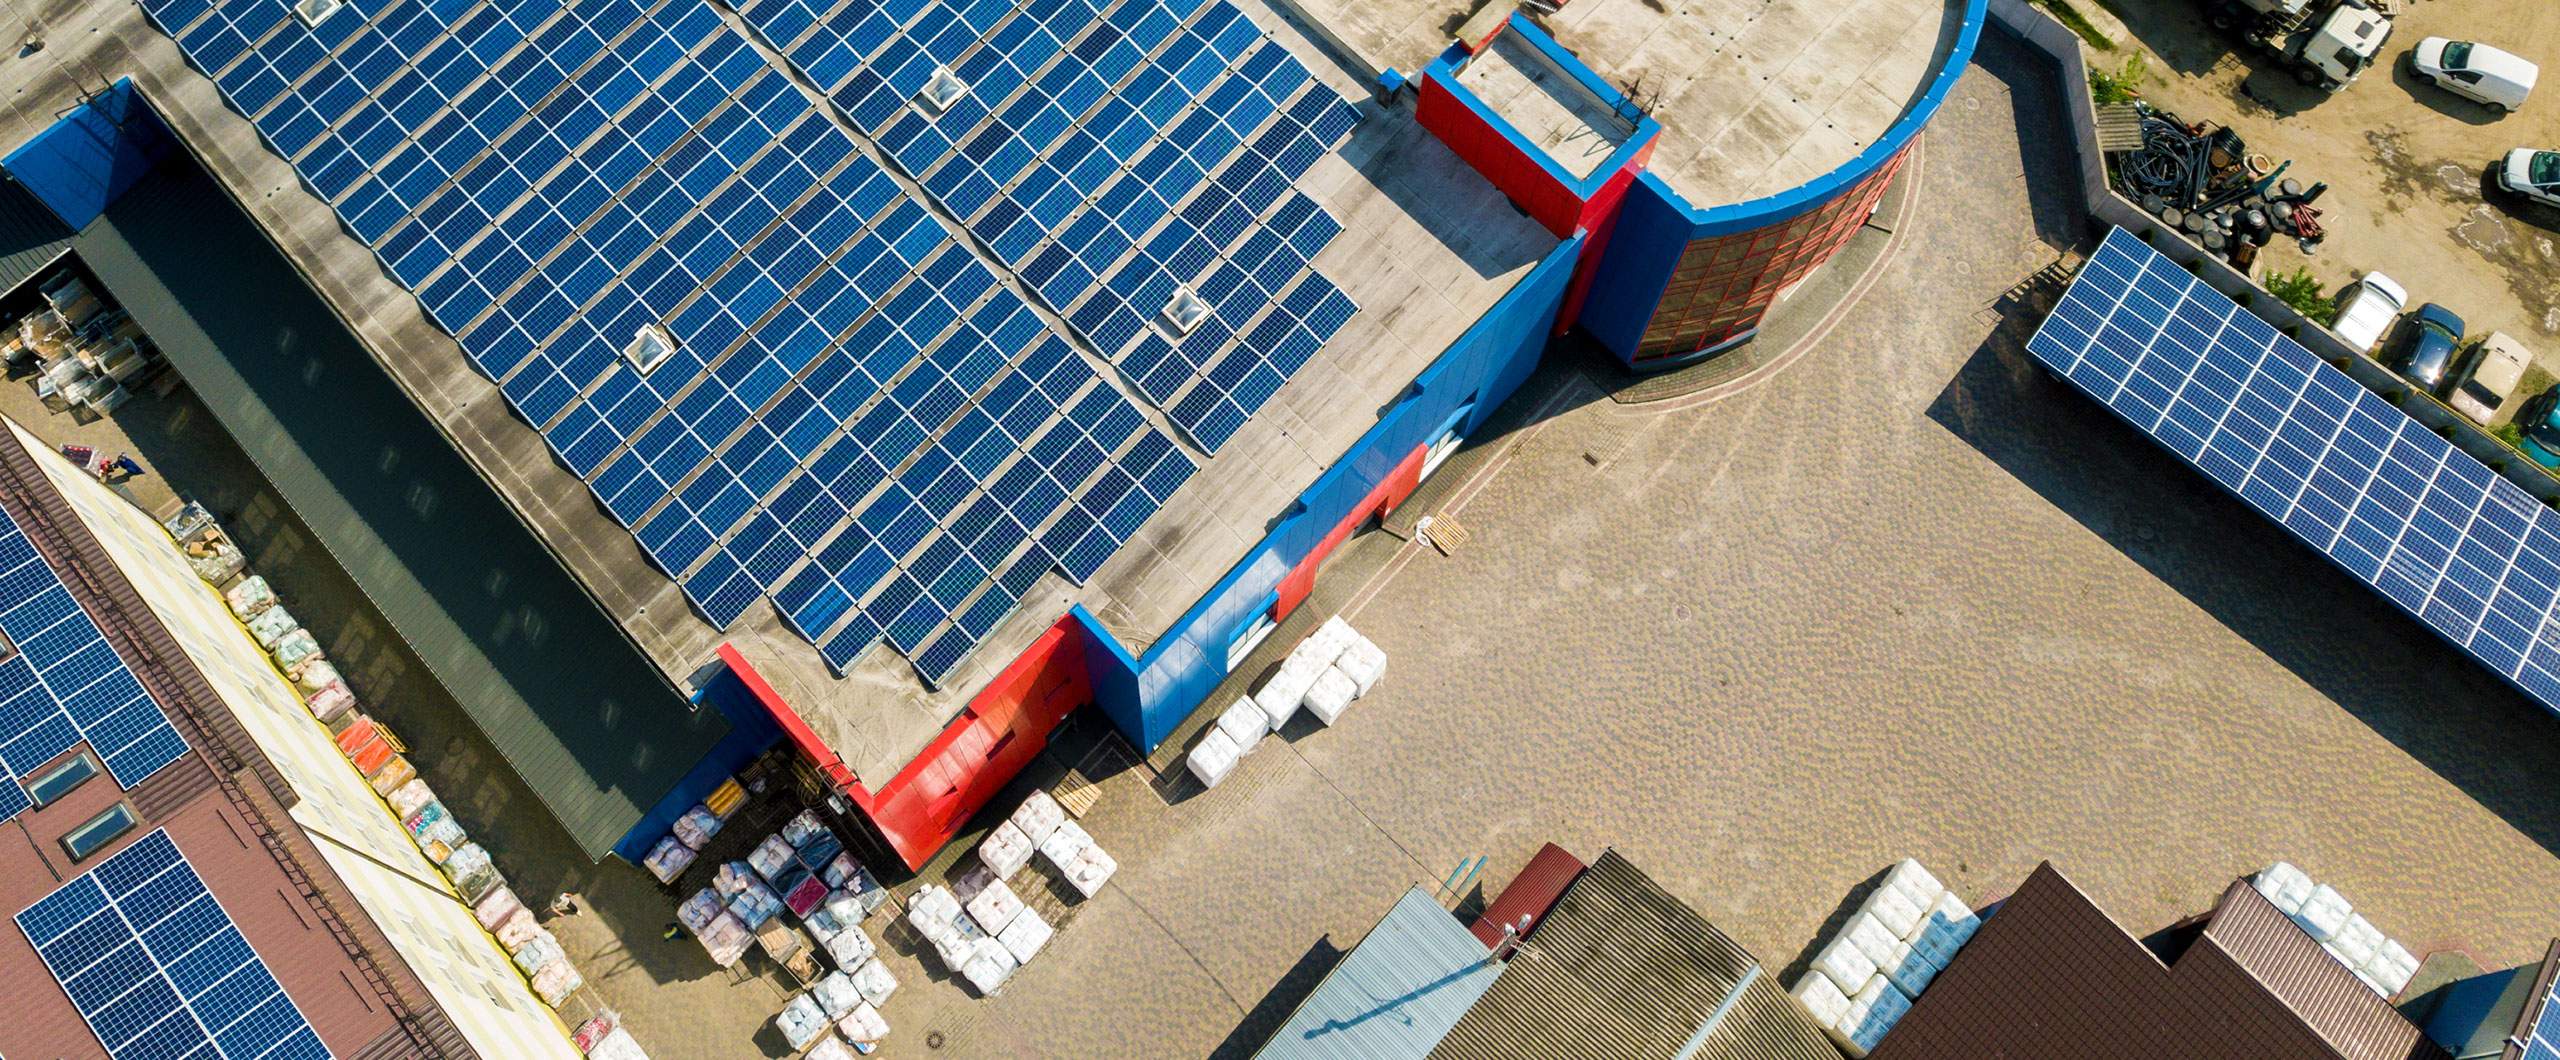 An aerial view of buildings with solar panel arrays on their roofs